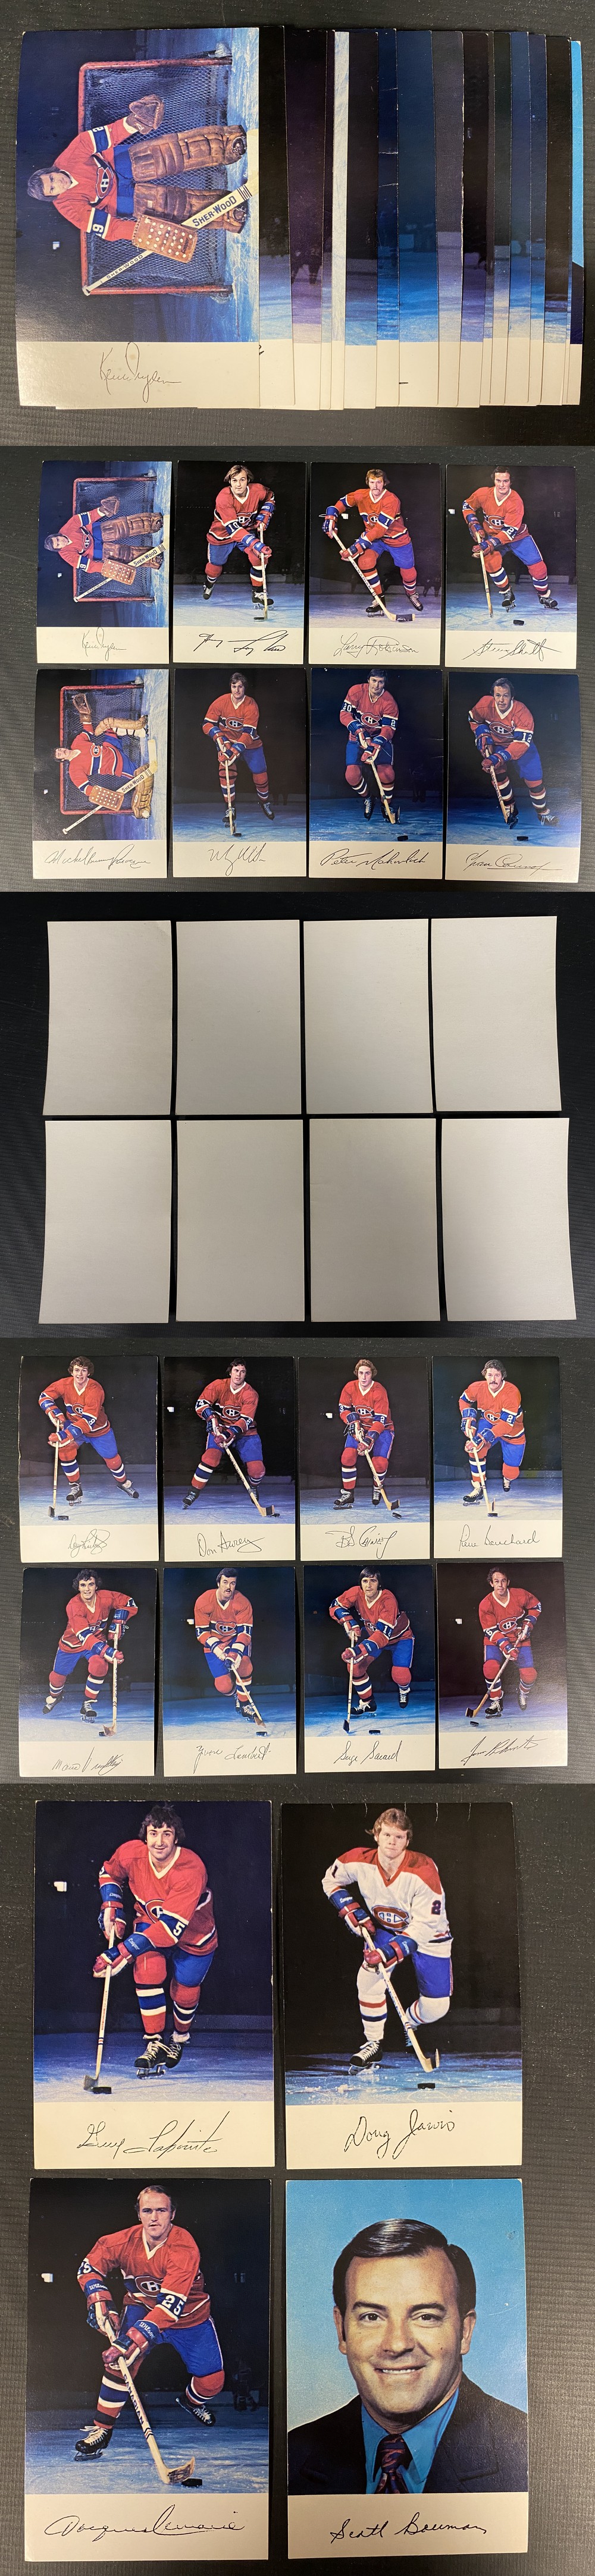 1975-76 MONTREAL CANADIENS POST CARD FULL SET 20/20 photo